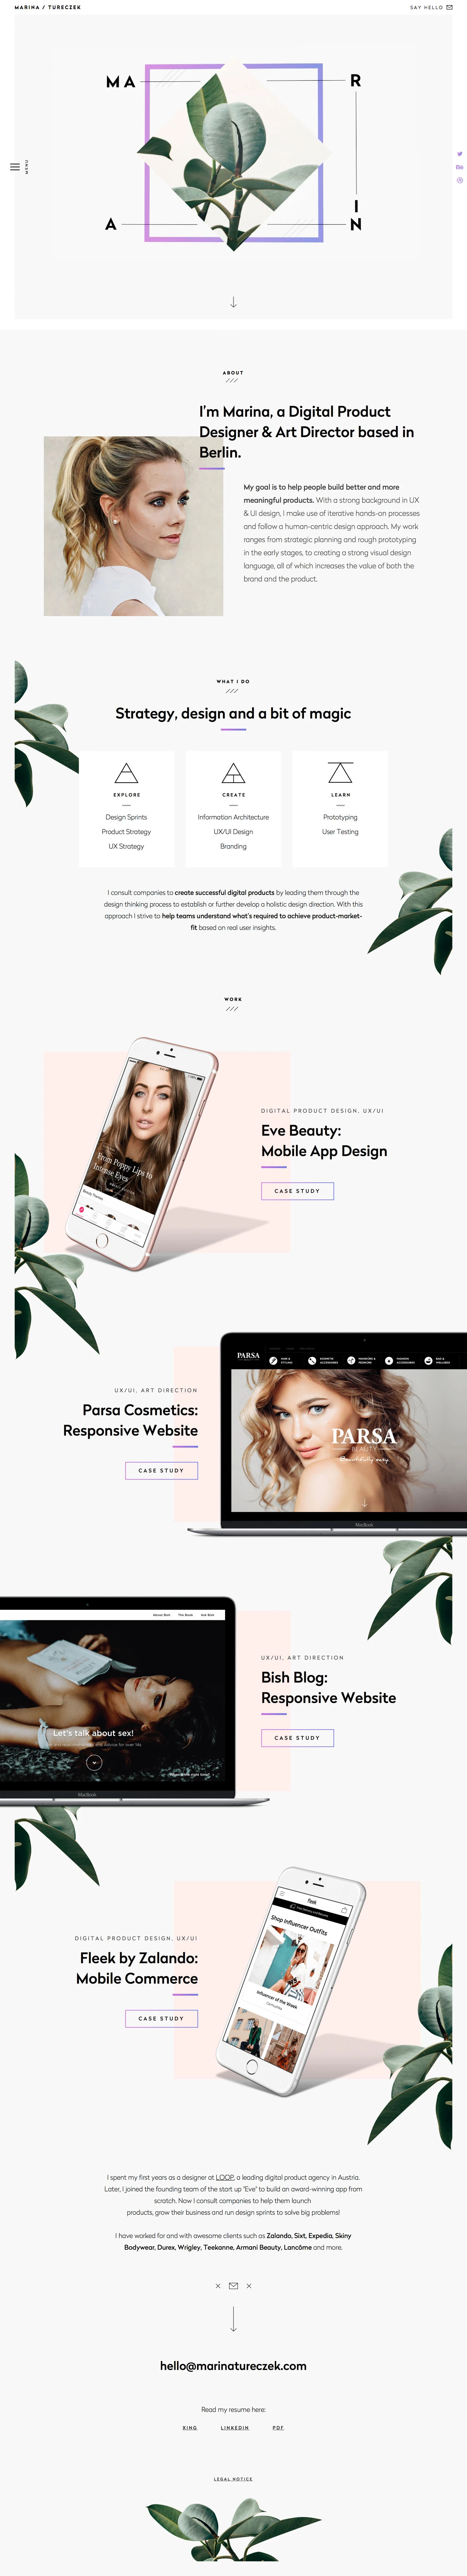 Marina Tureczek Landing Page Example: I’m Marina, a Digital Product Designer & Art Director based in Berlin. With a strong background un UX/UI design, I believe in iterative hands on processes. I run design sprints.